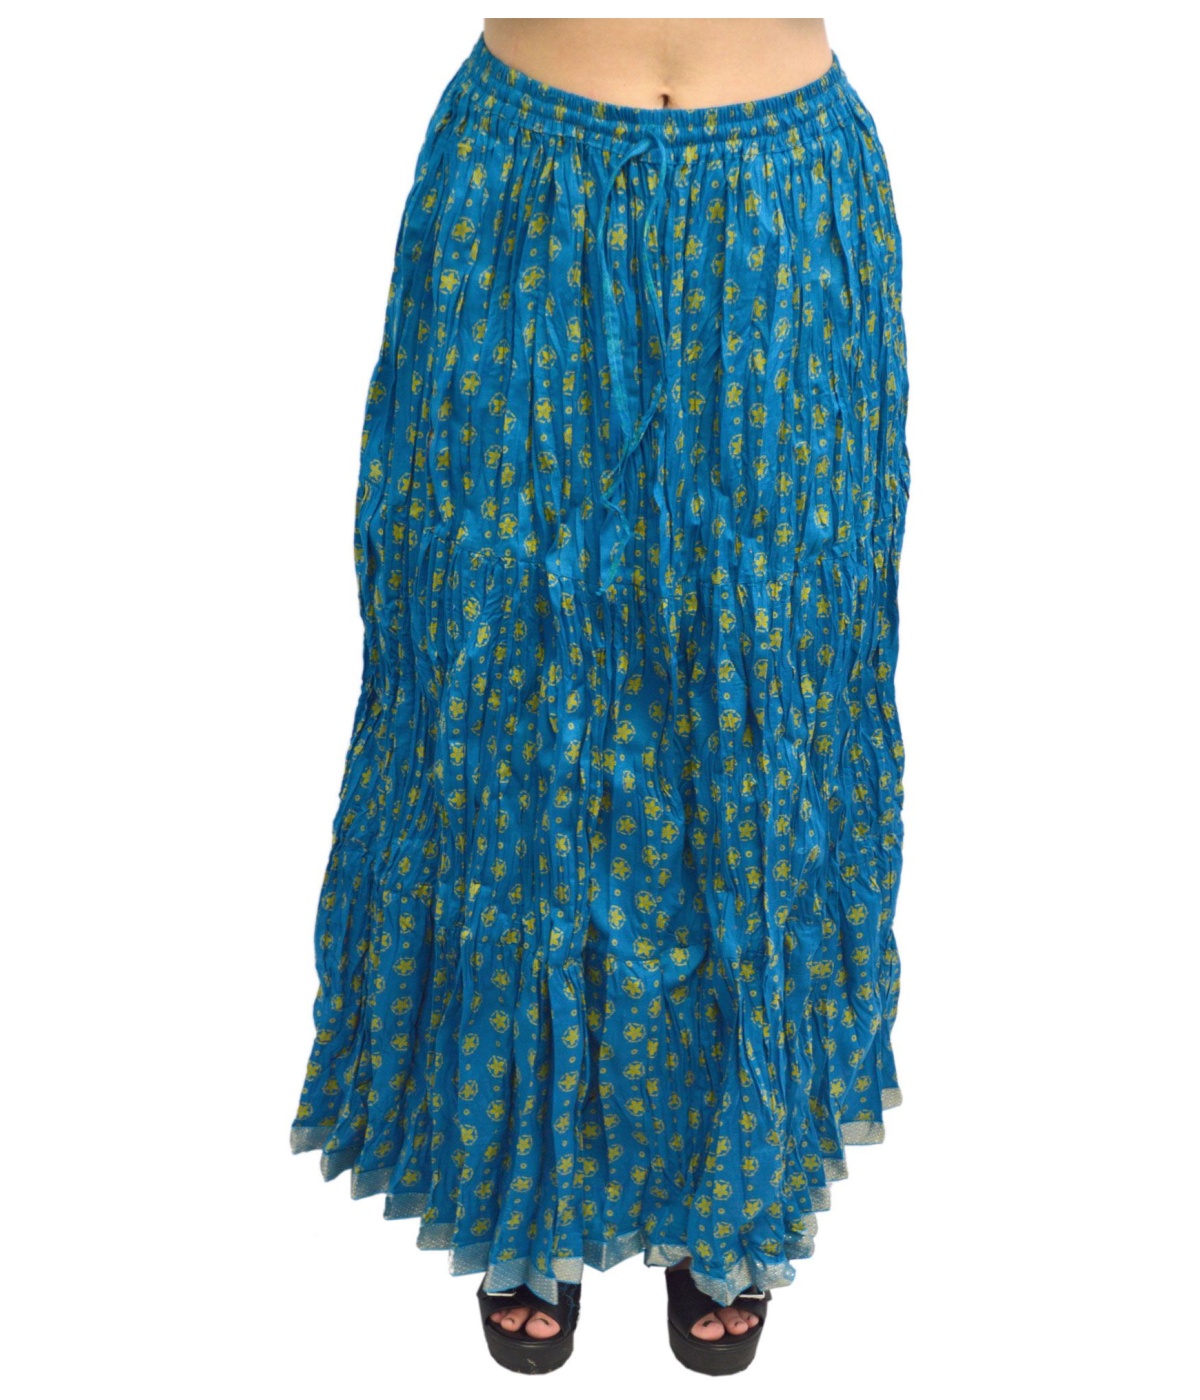  Womens Indian Cotton Turquoise Long Skirt